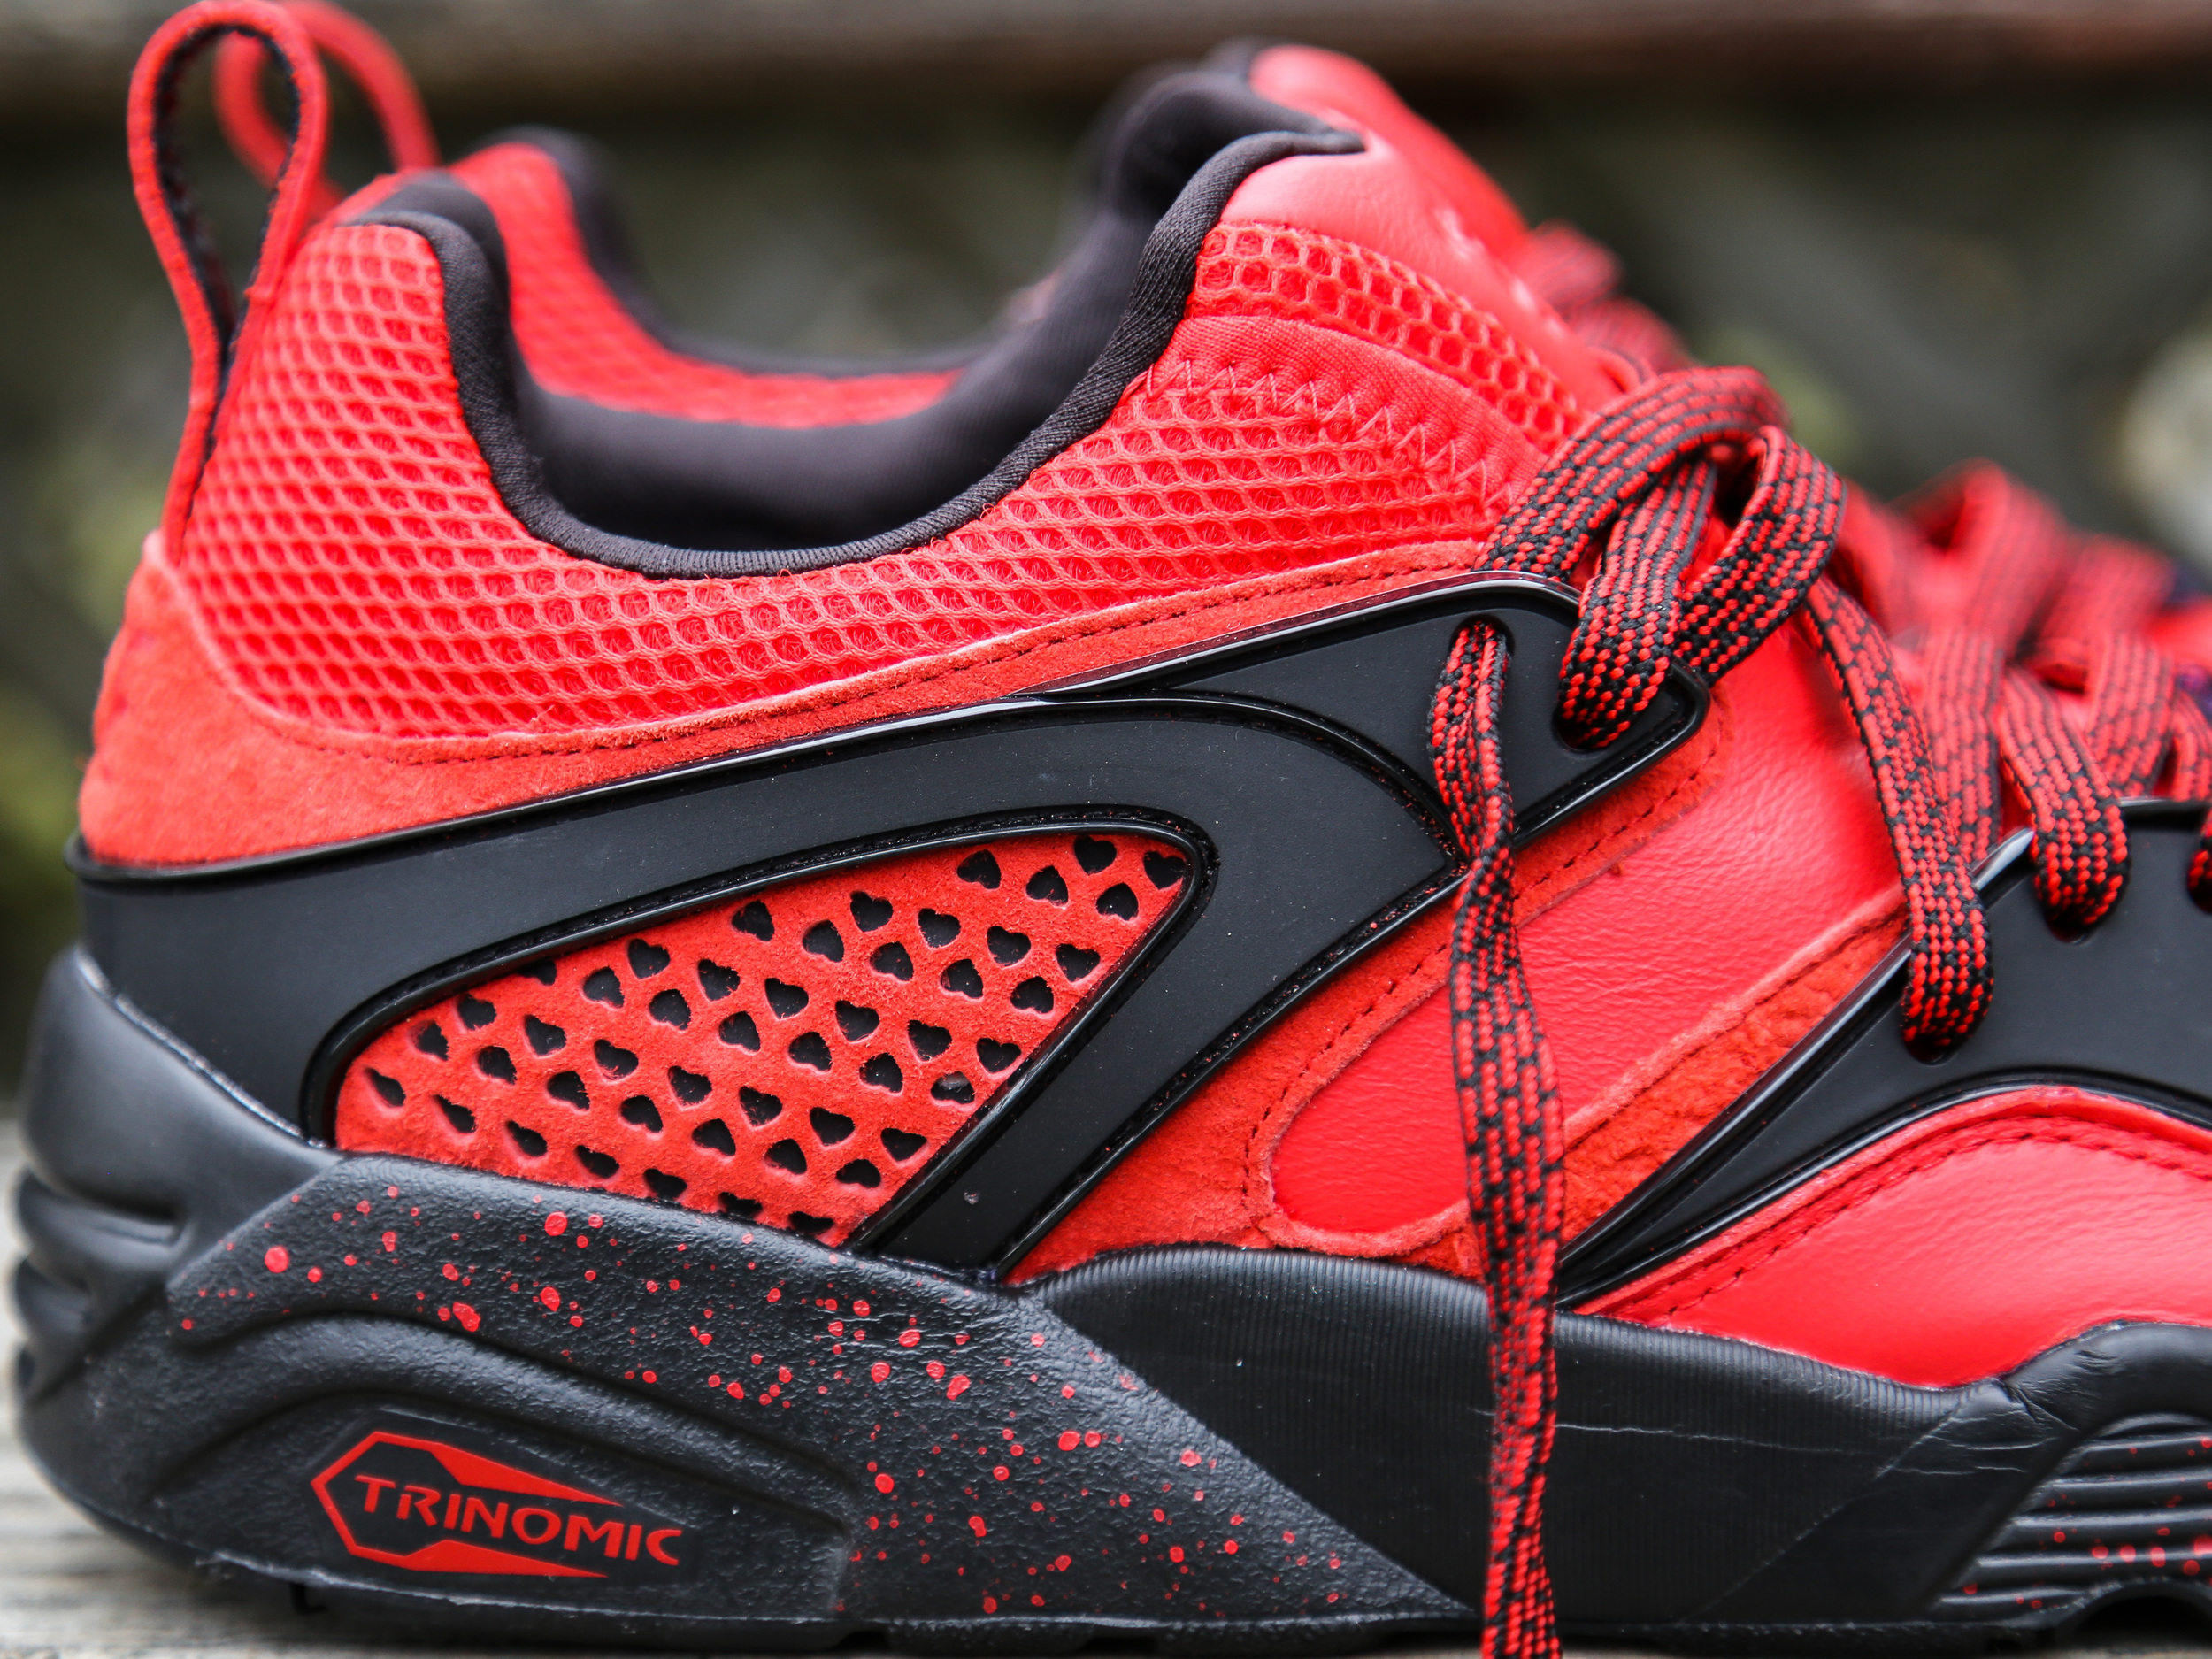 Rise-Puma-Blaze-of-Glory-AIDS-Collab-New-York-Is-For-Lovers-2-5.jpg